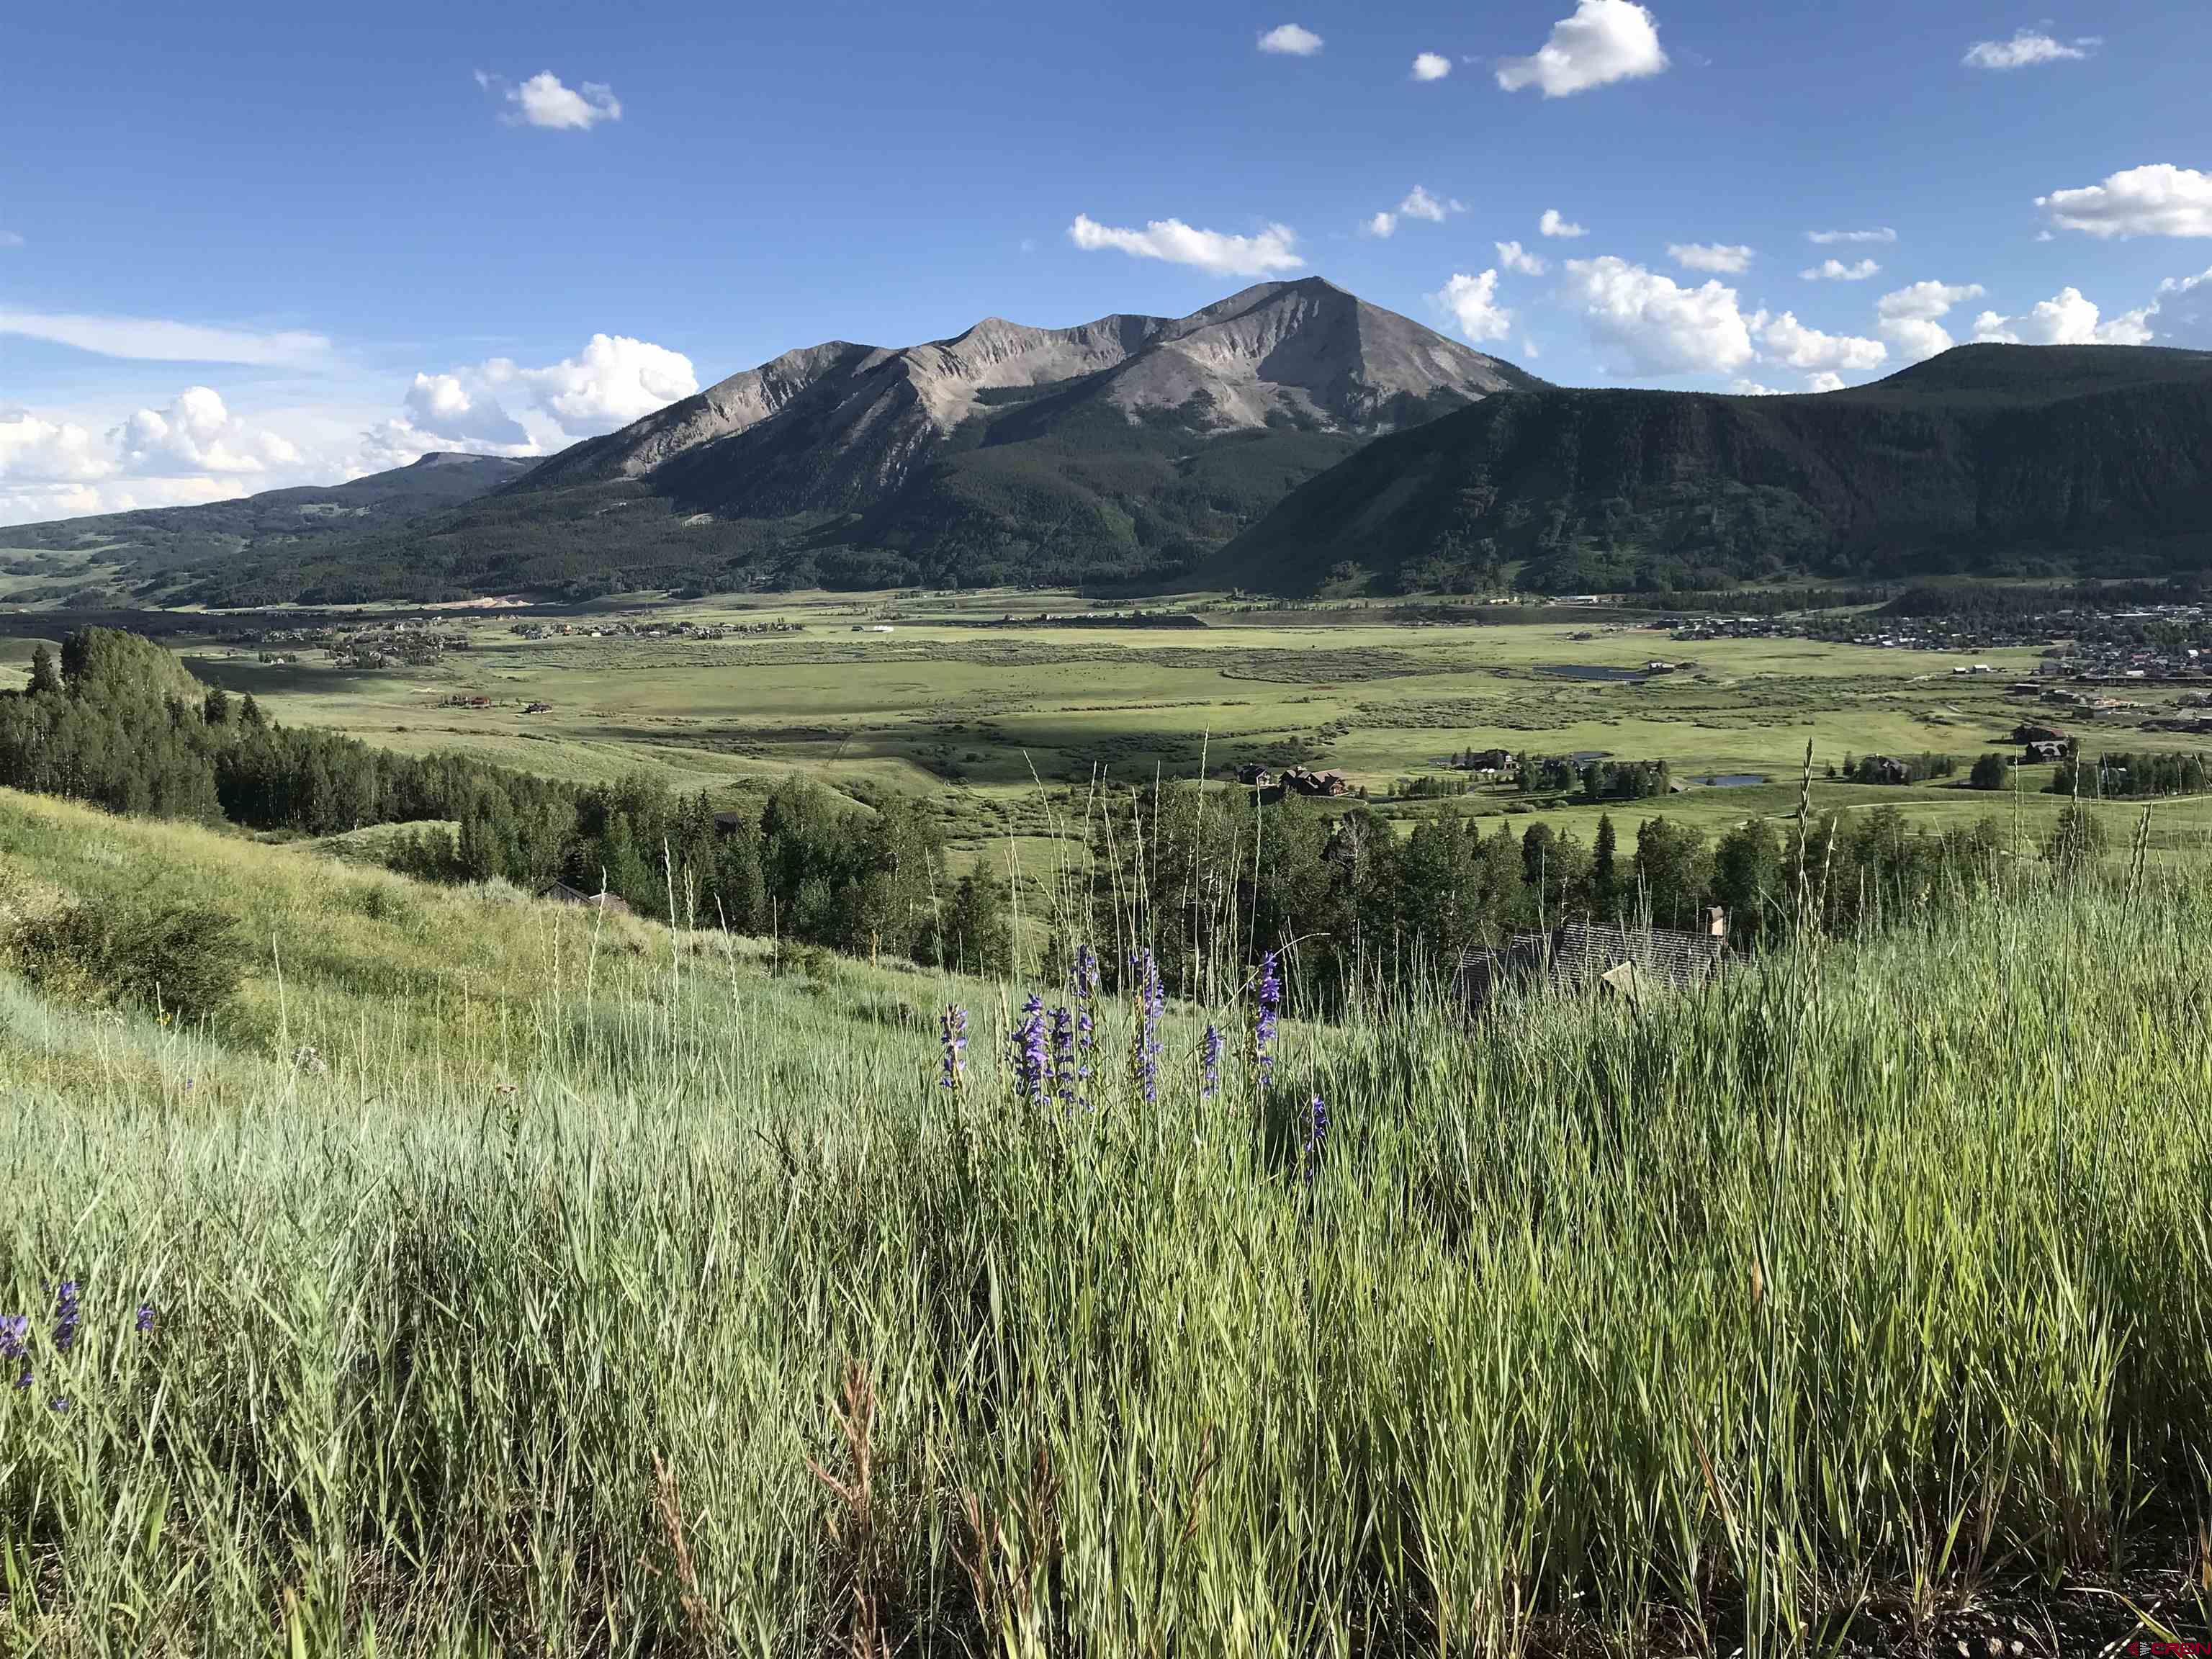 35 Overlook Drive, Mt. Crested Butte, CO 